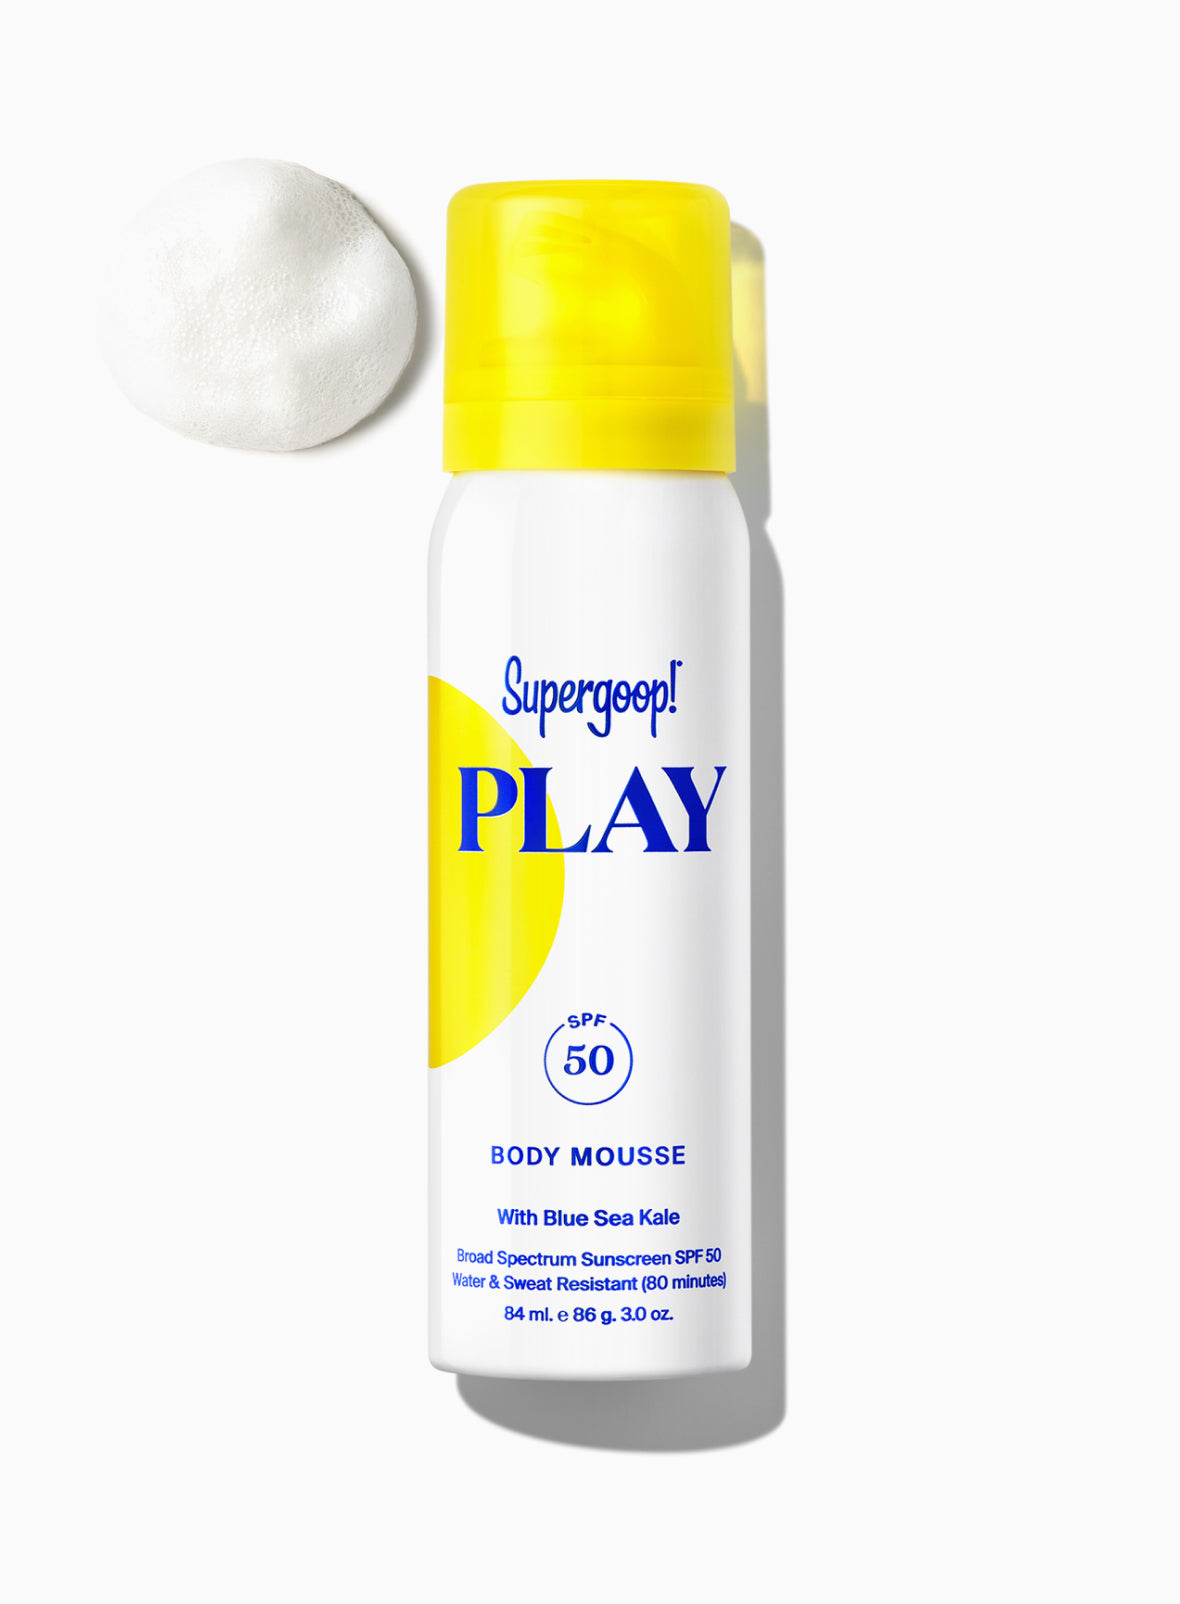 PLAY Body Mousse SPF 50 Sunscreen 3 oz. | Supergoop!